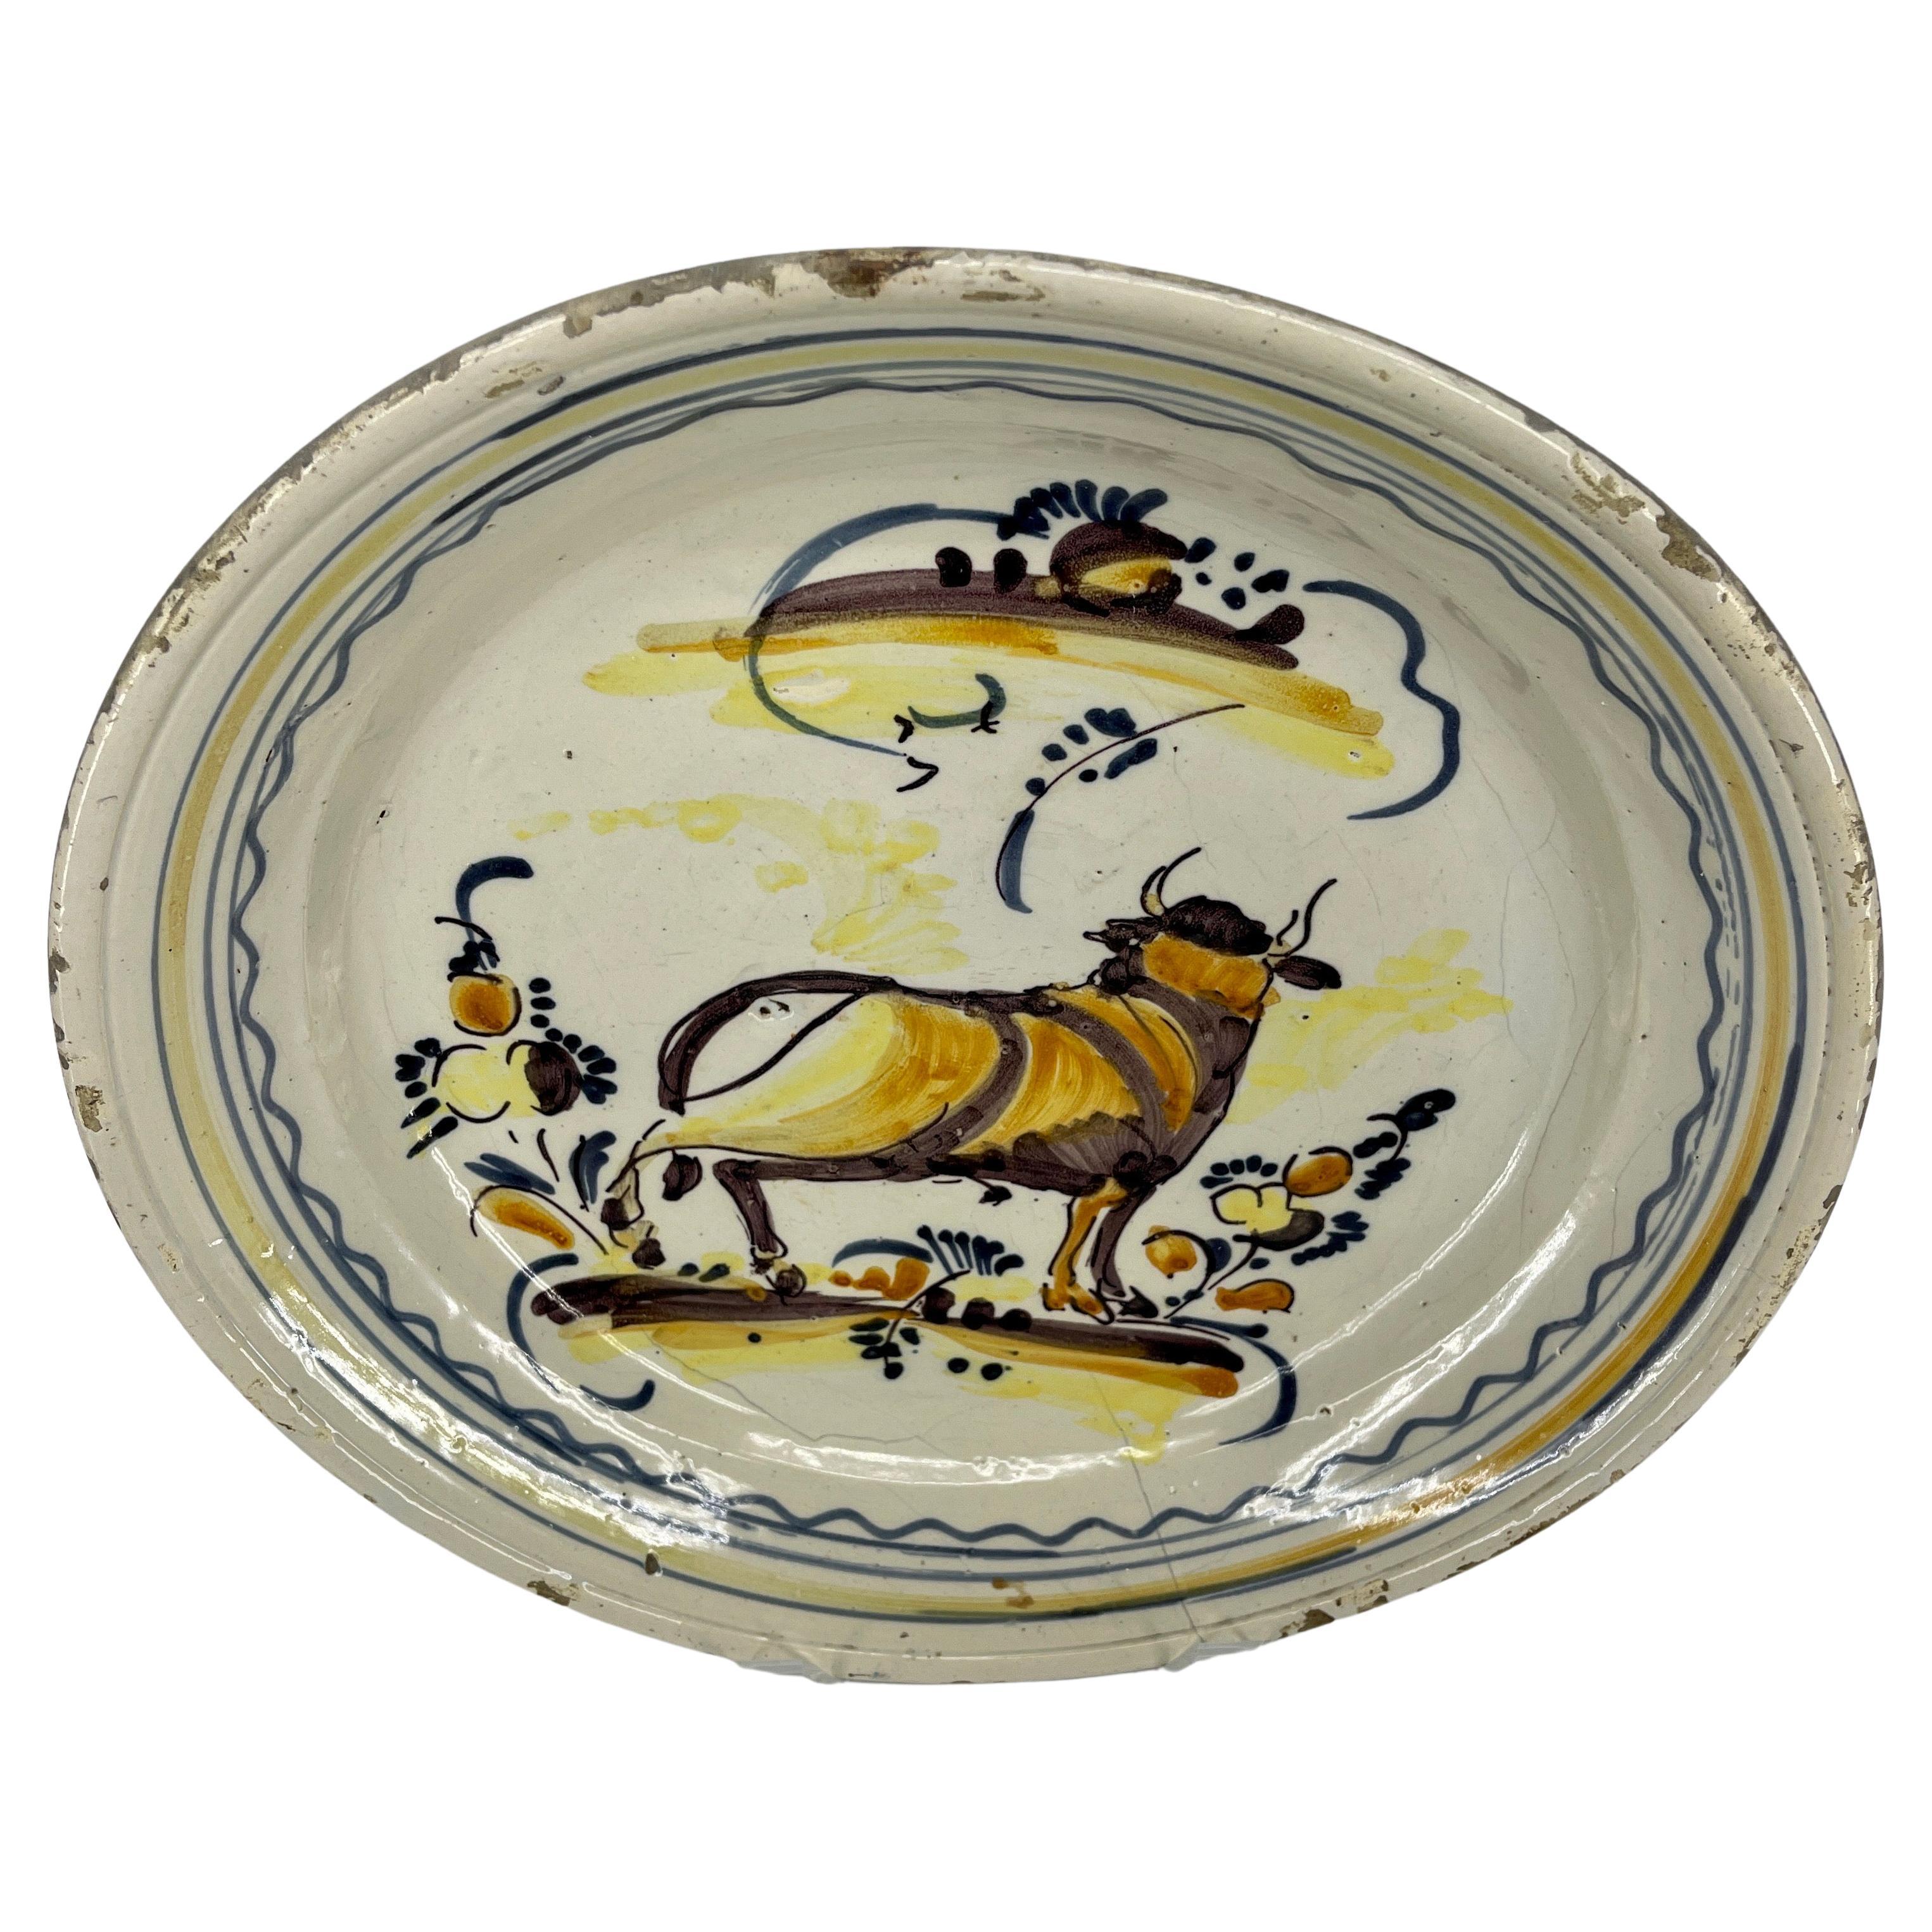 Folk Art Antique Spanish Polychrome Ceramic Charger with a Bull Decoration For Sale